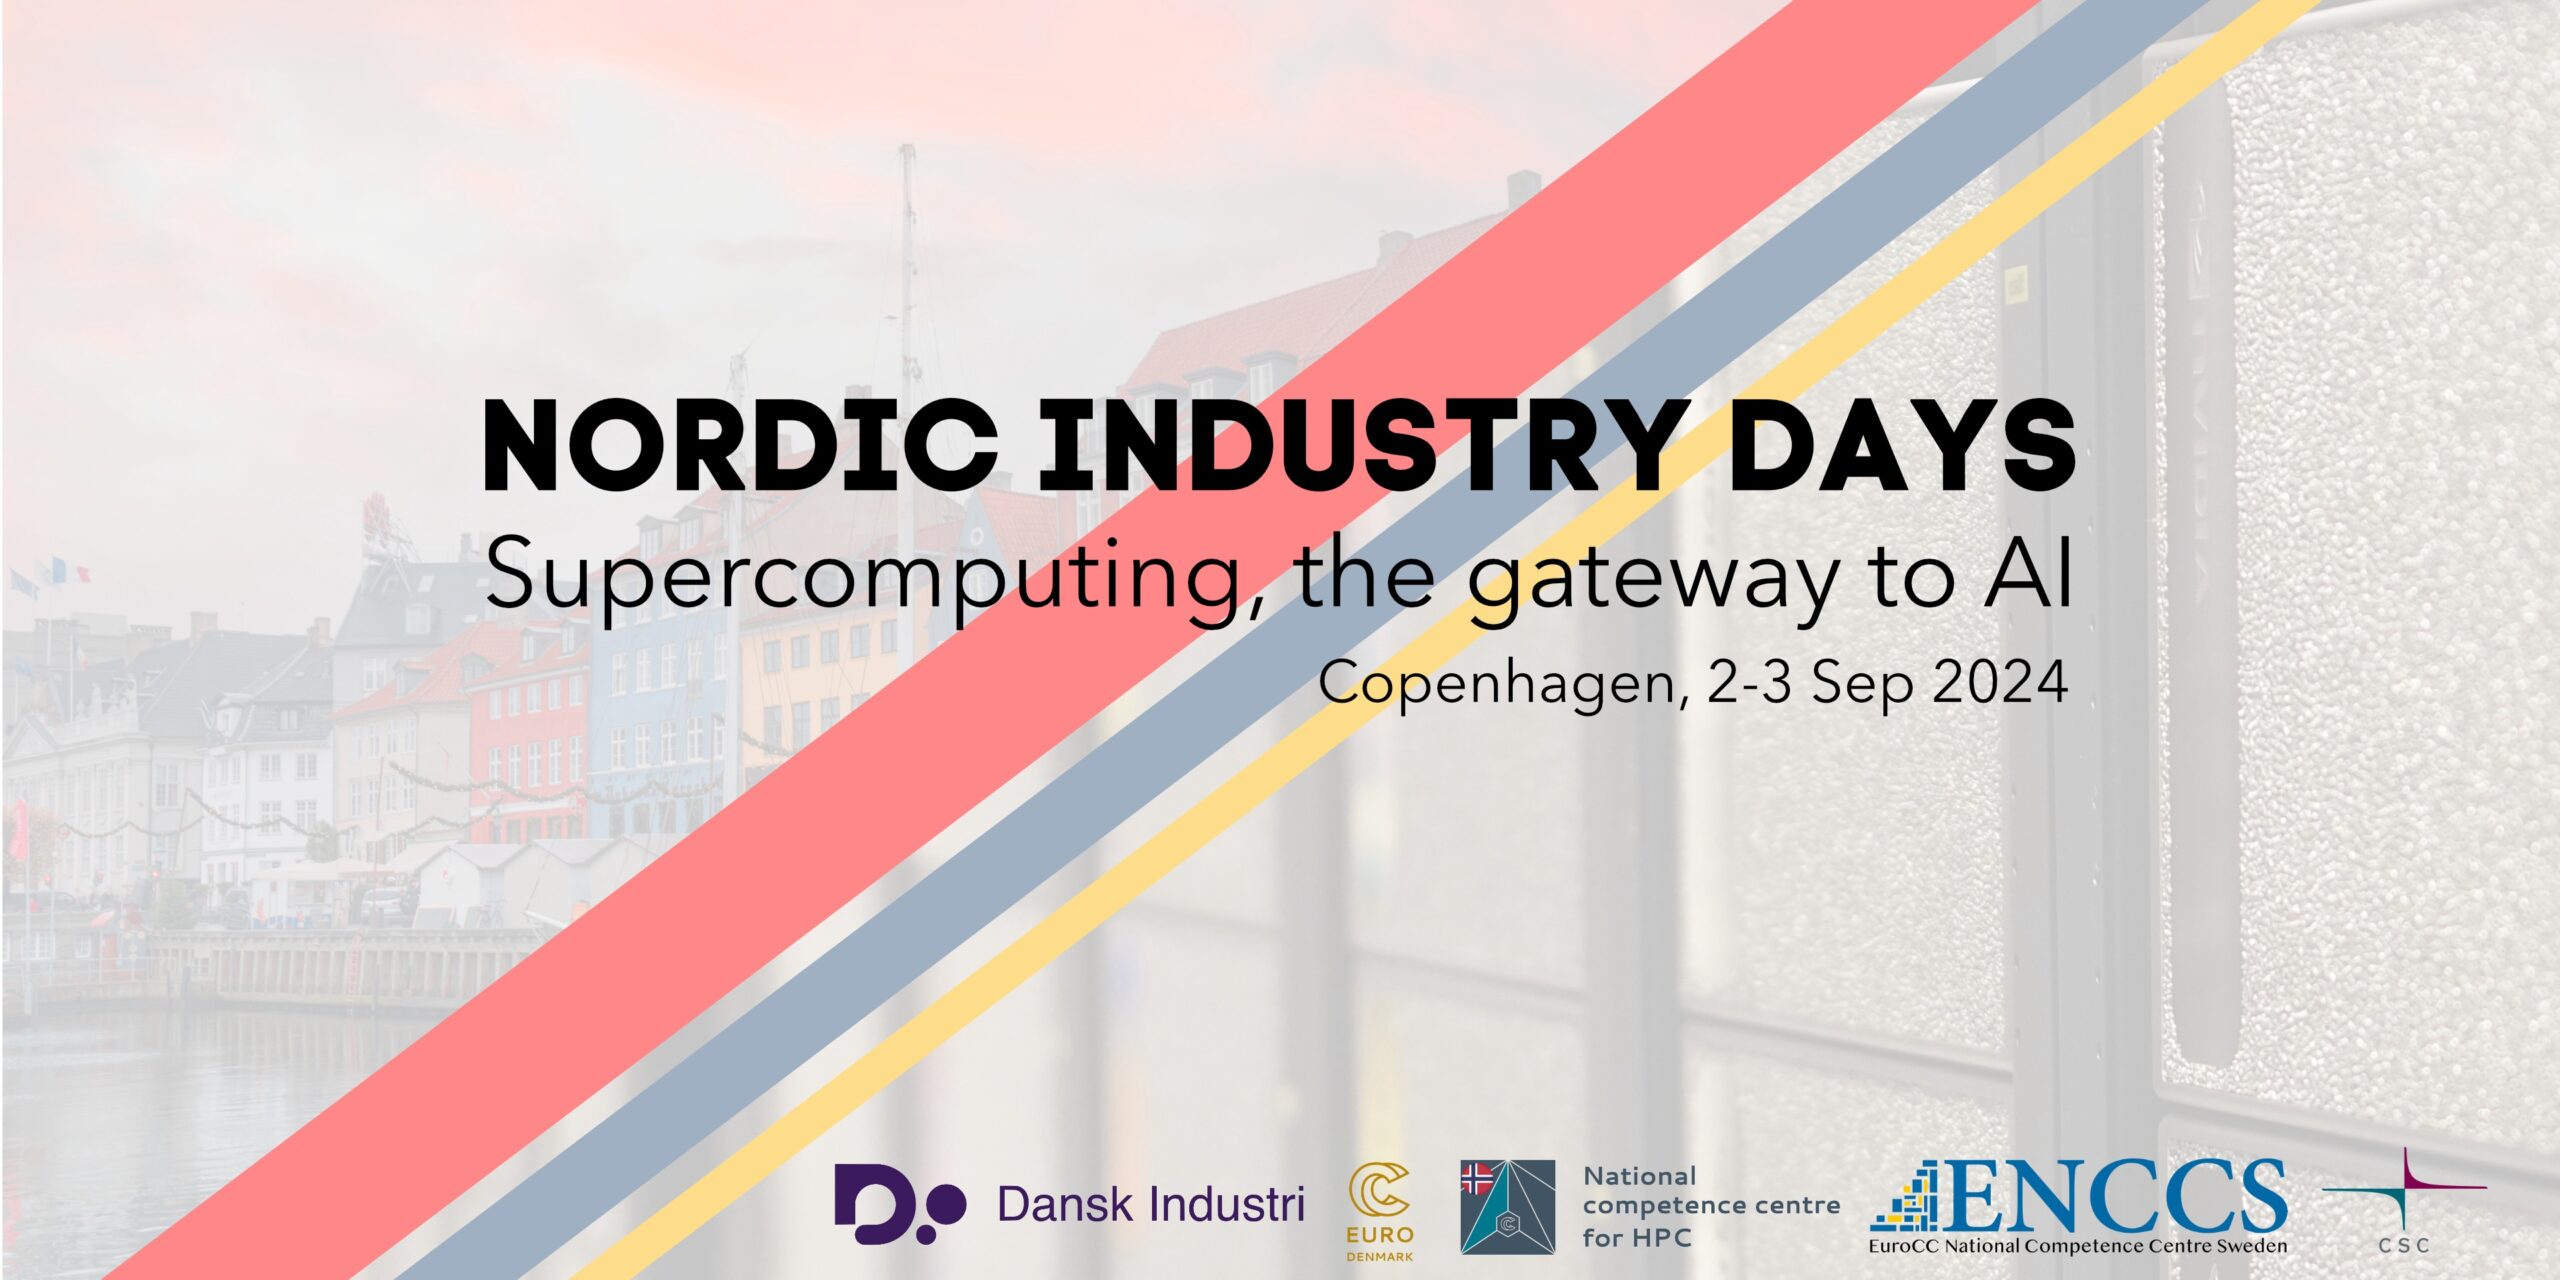 An image of Copenhagen merges with a supercomputer. A diagonal stripe through the title "Nordic Industry Days"